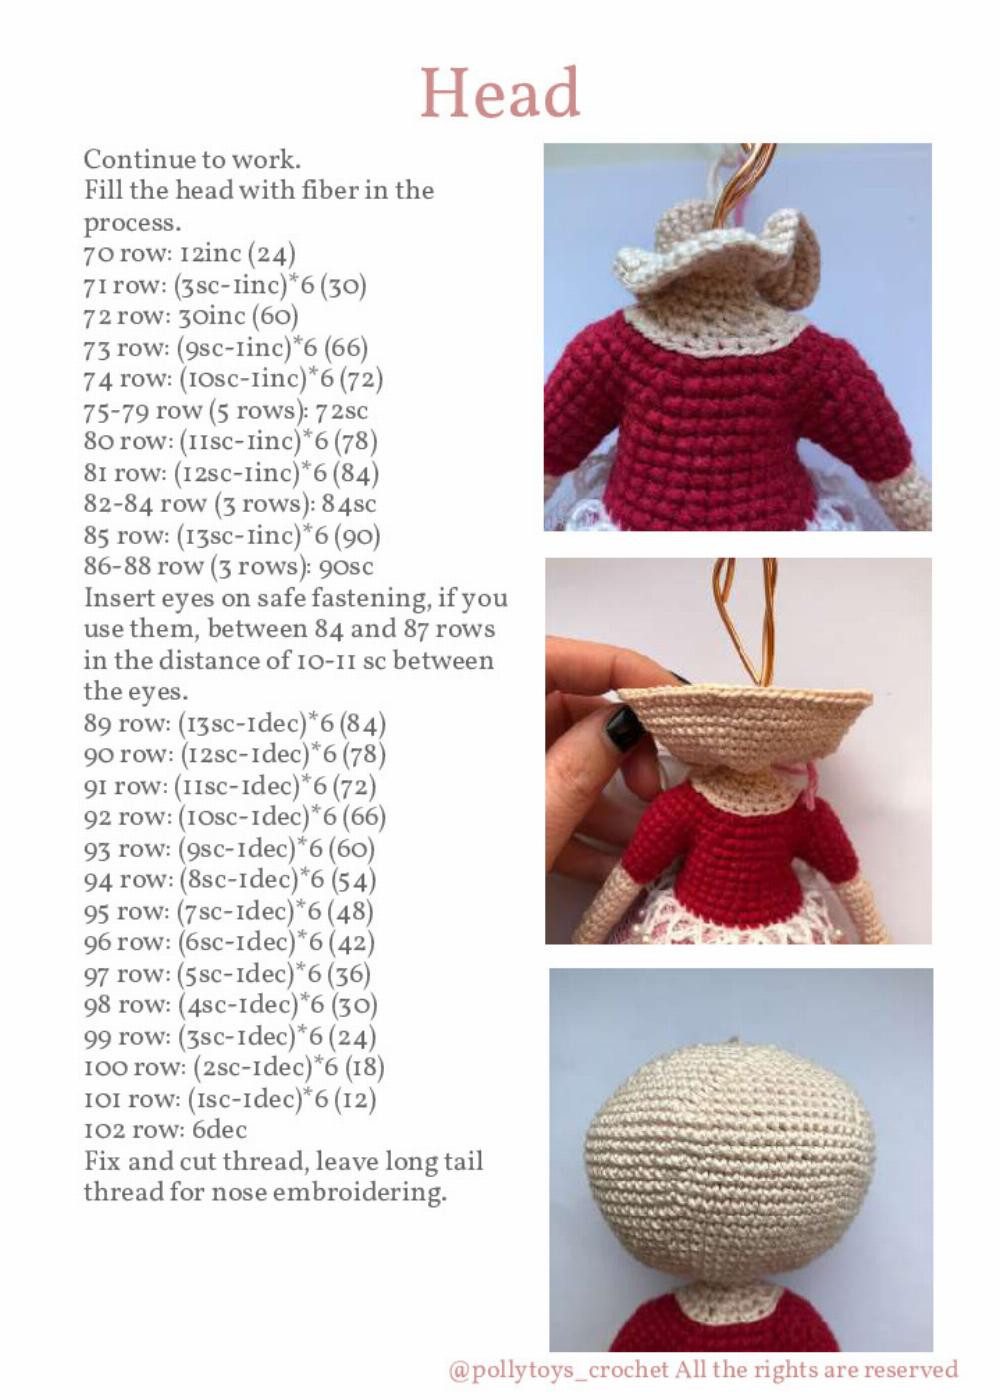 pattern crocheted doll rose the fairy